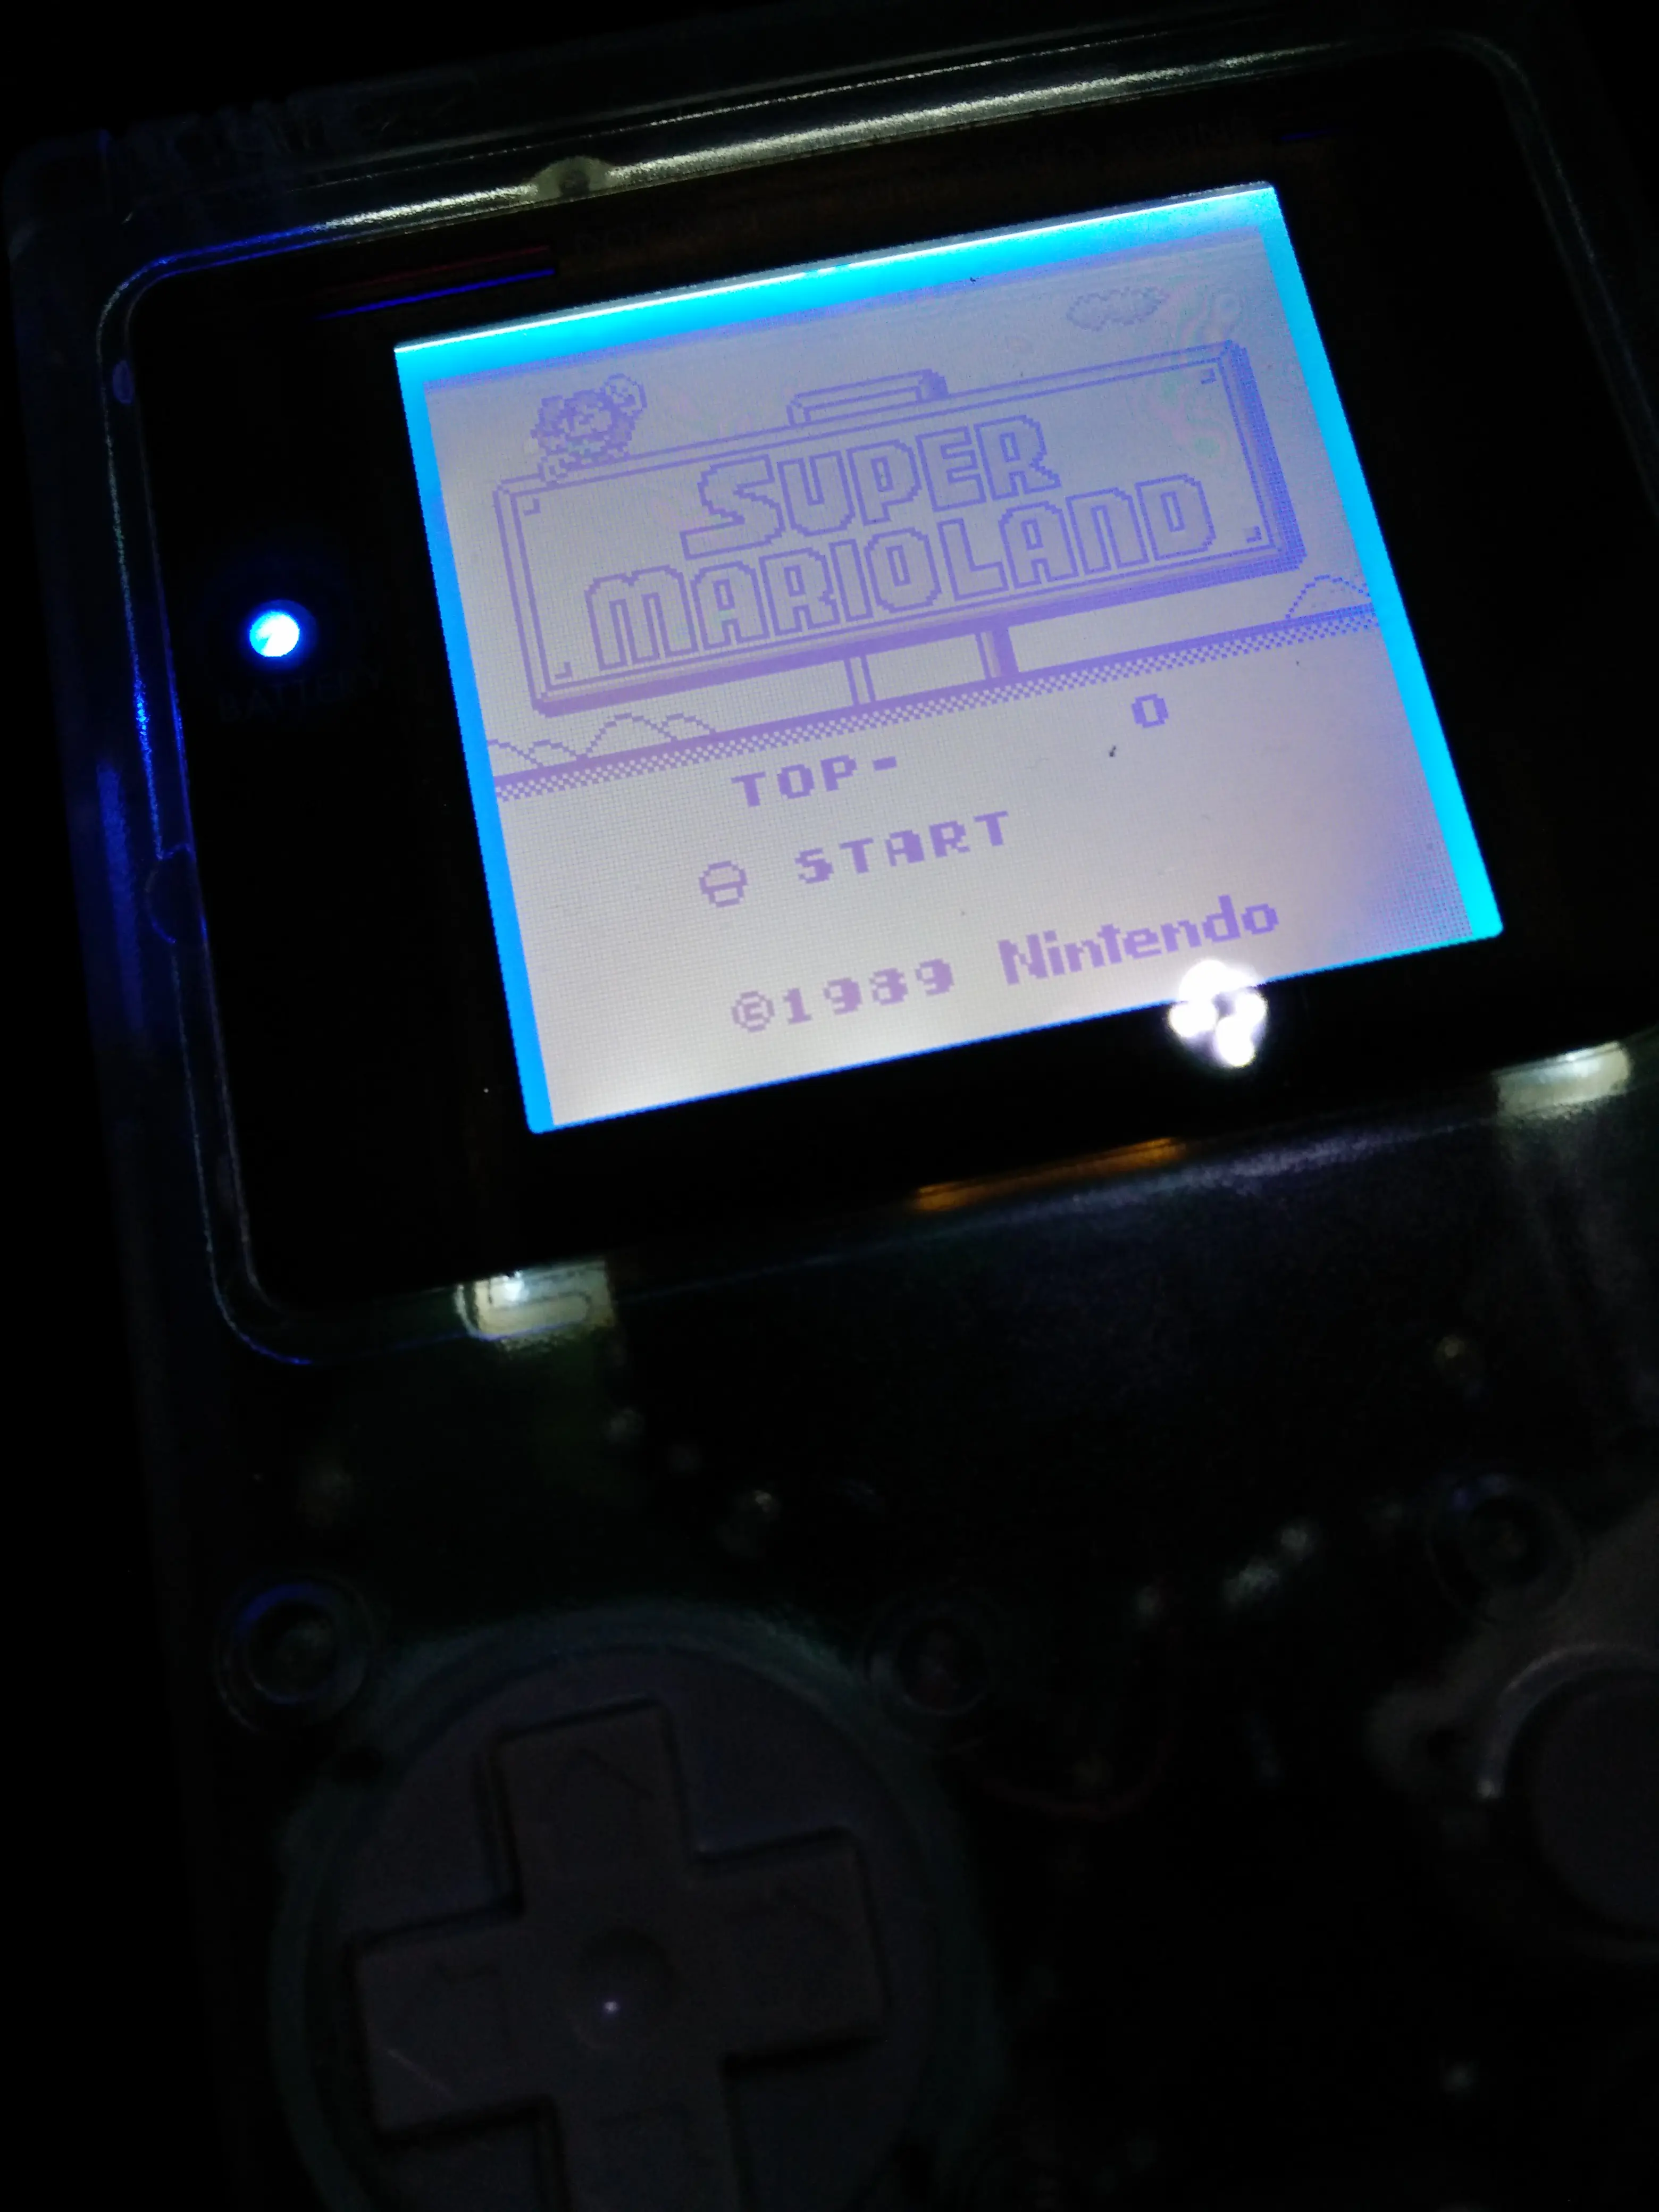 Gameboy DMG-01 Backlight Mod with Bivert Chip showing Super Mario Land title screen